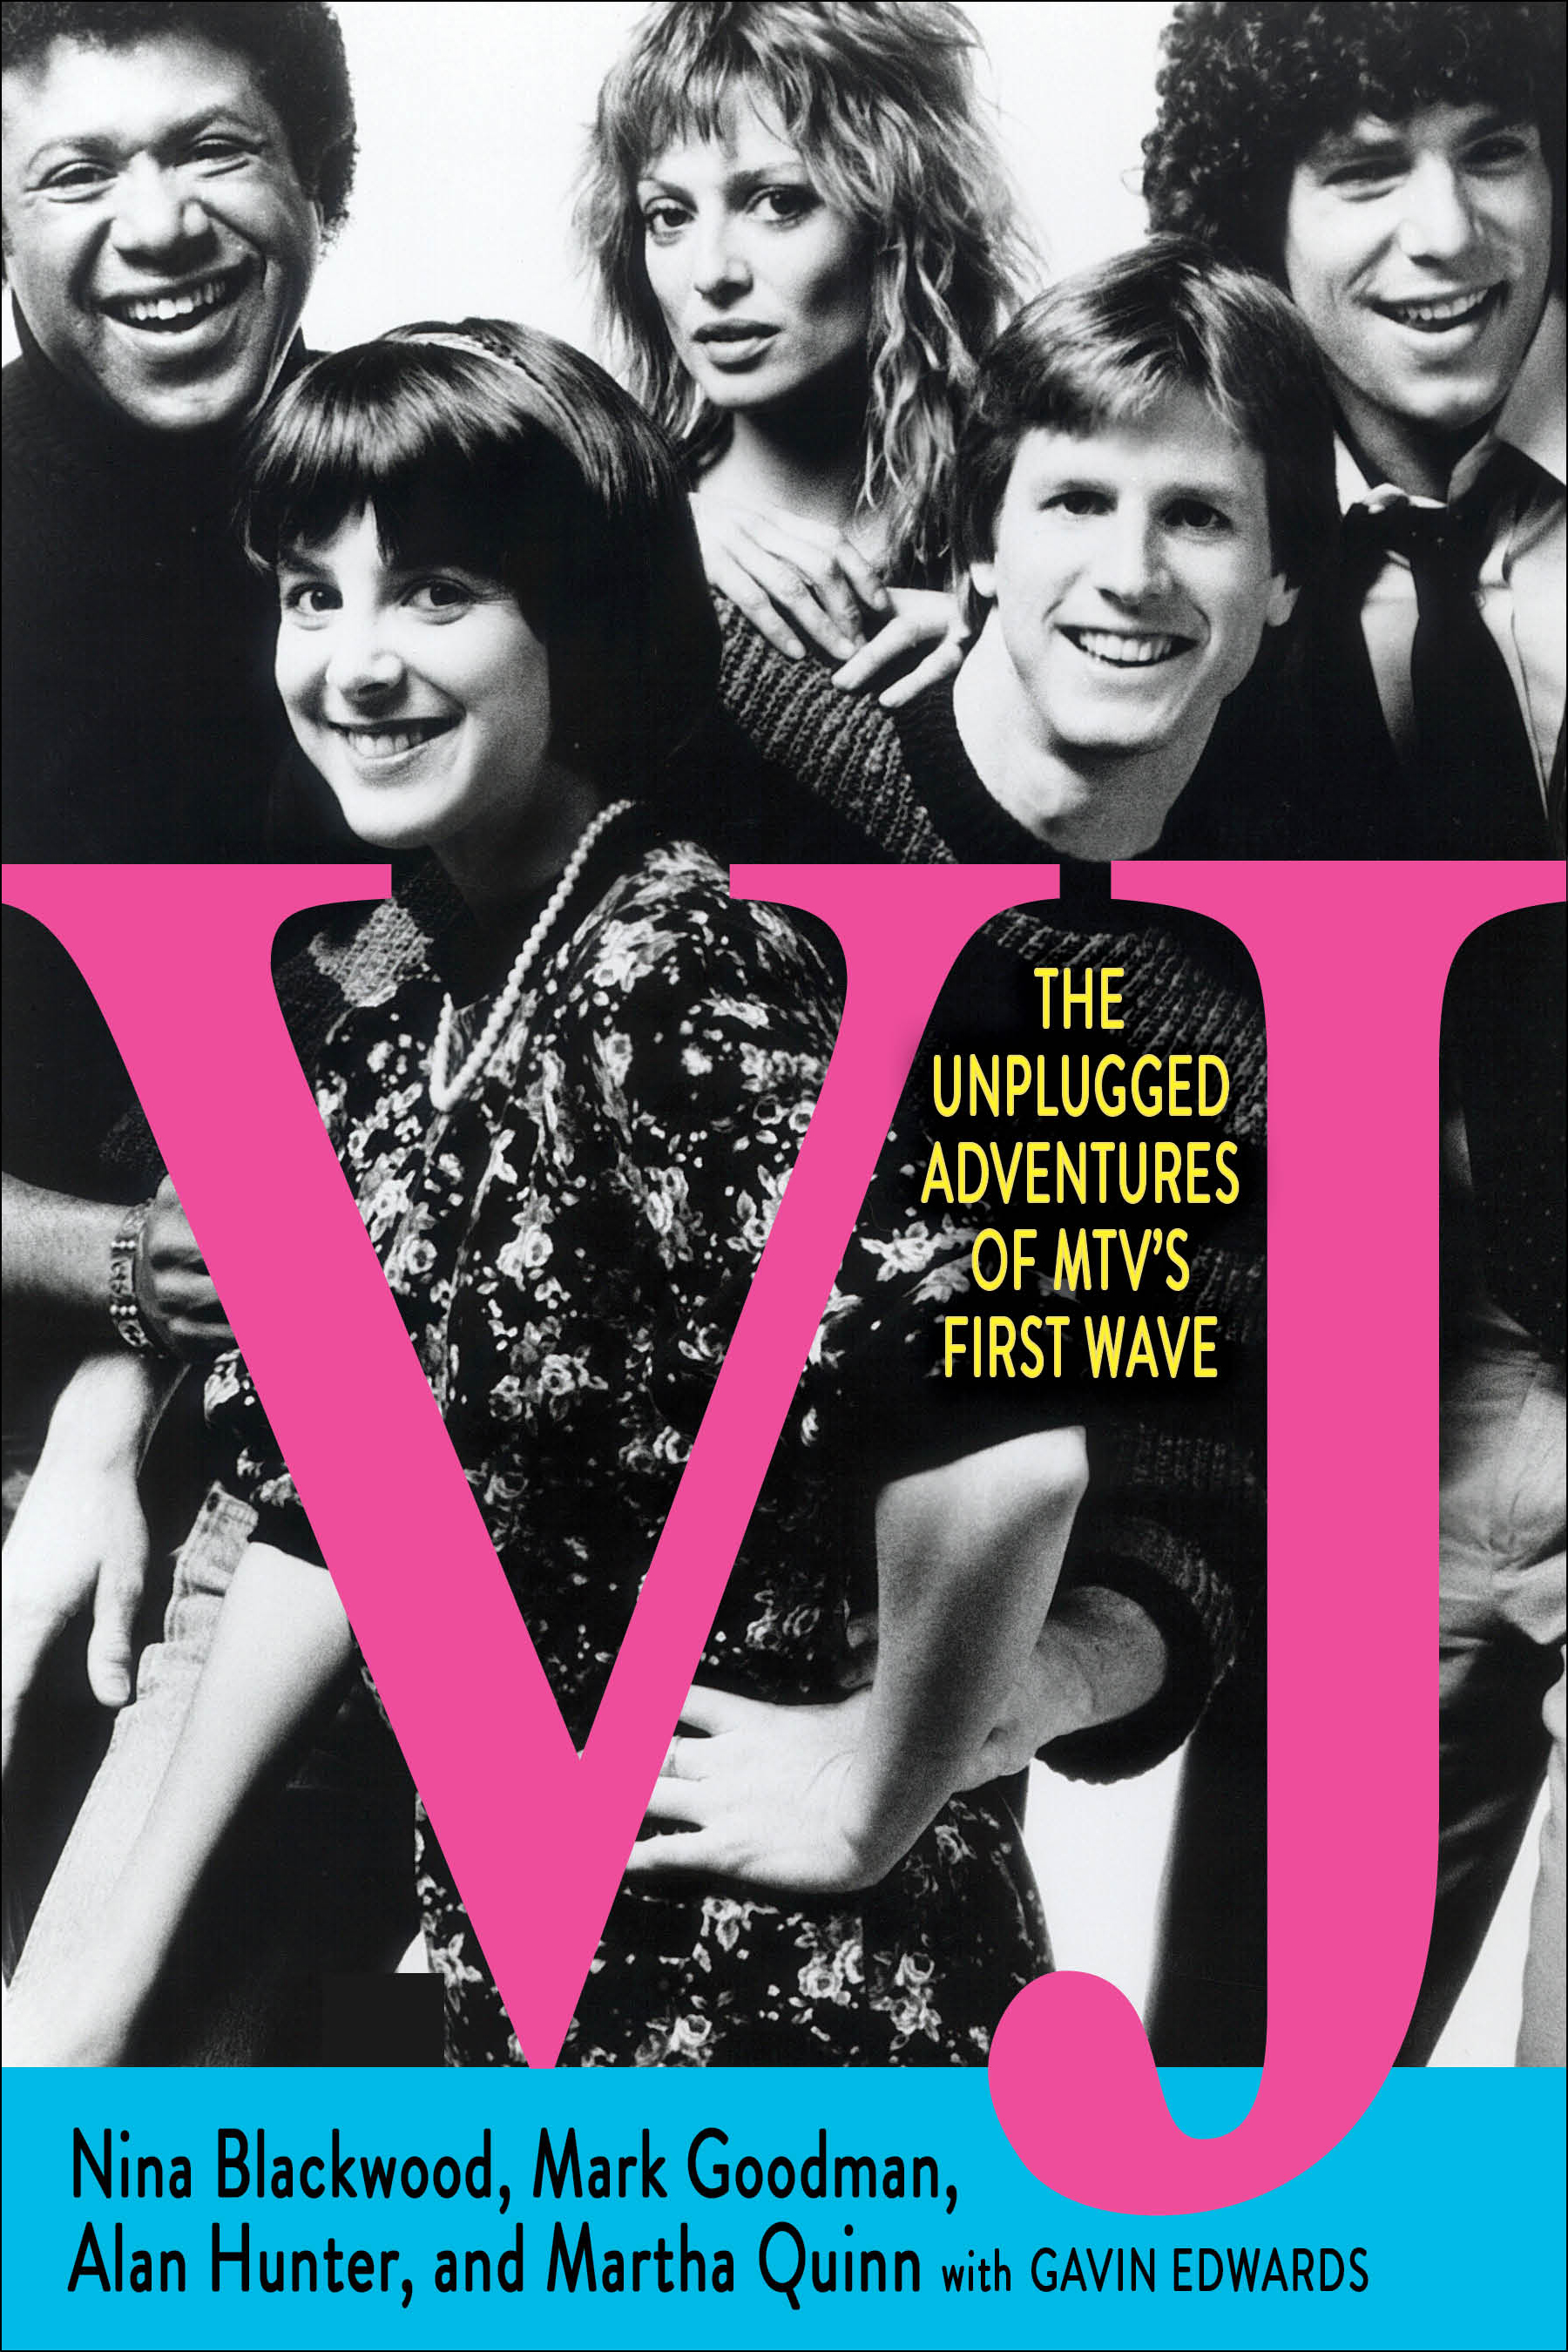 Book Launch: VJ: The Unplugged Adventures of MTV's First Wave by Gavin Edwards